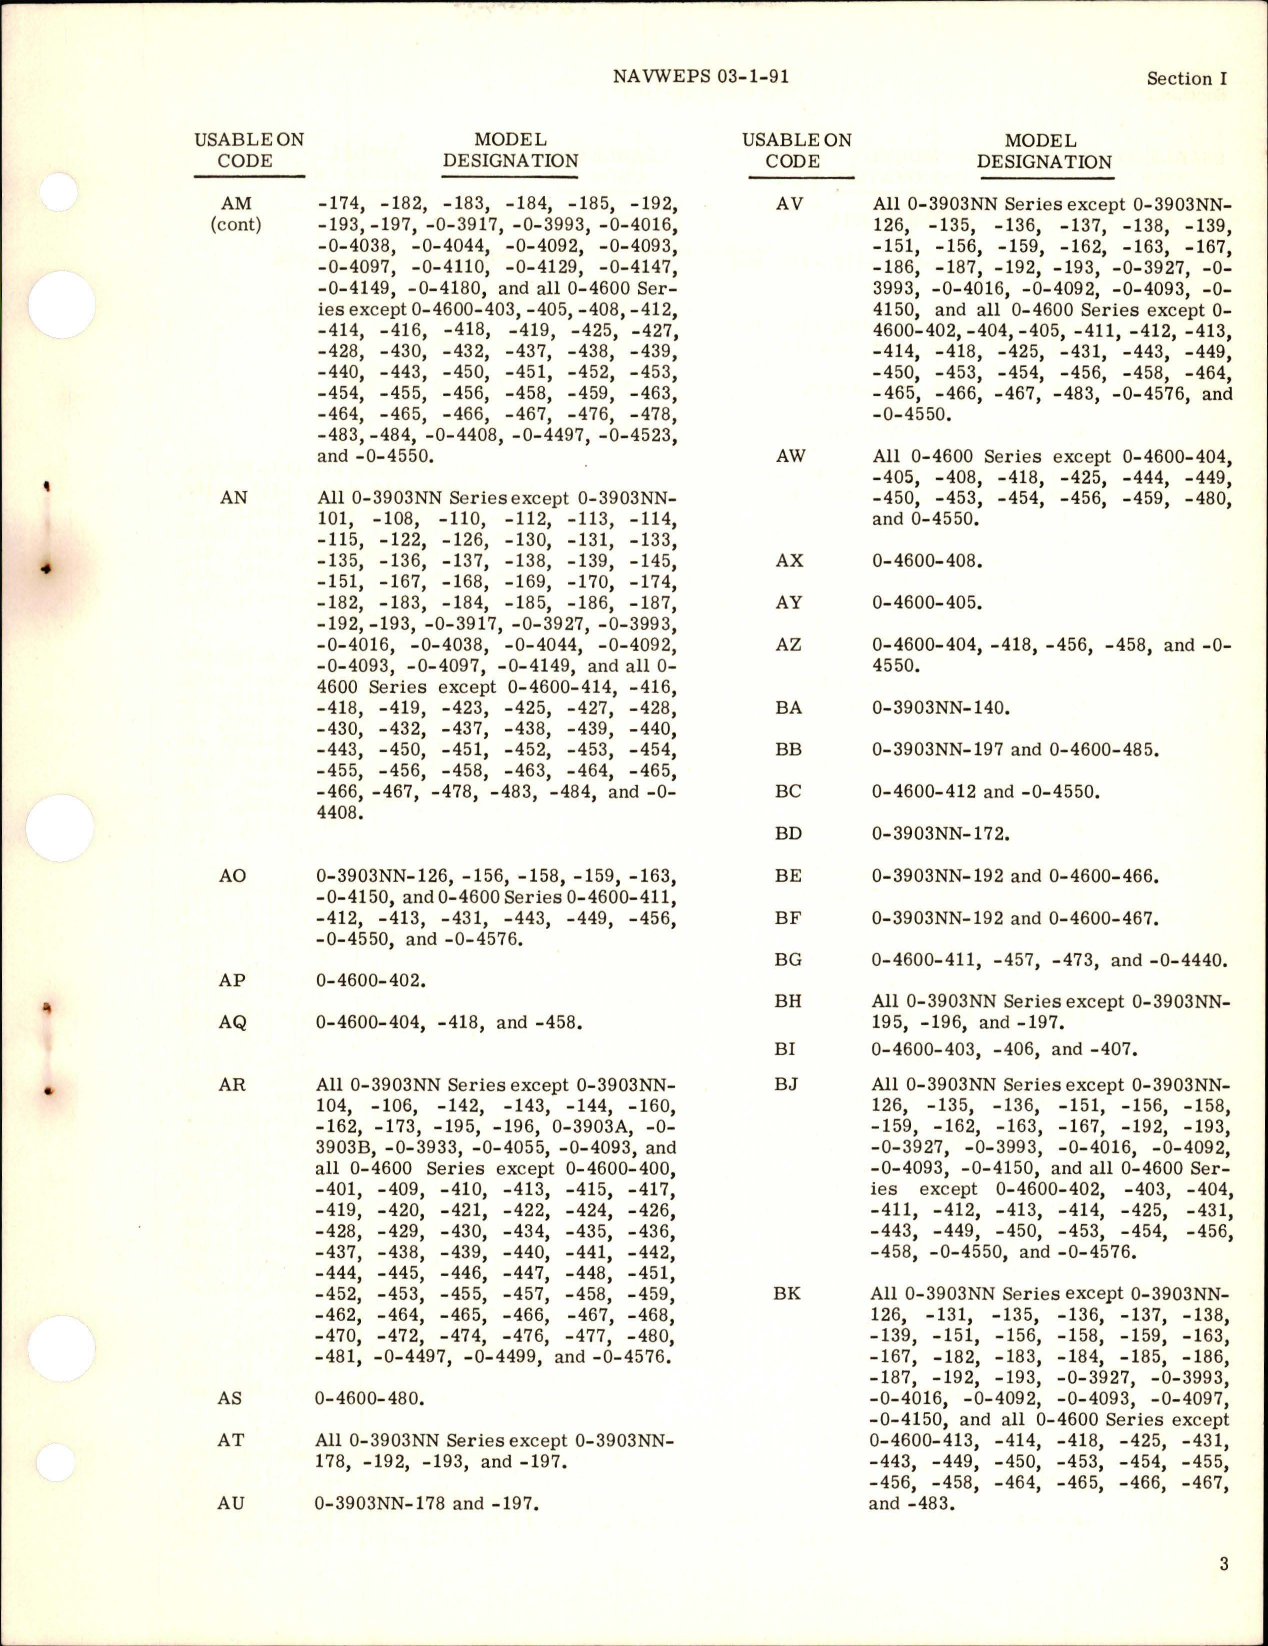 Sample page 5 from AirCorps Library document: Illustrated Parts Breakdown for Inertia Locking Reel - Models 0-3903NN and 0-4600 Series